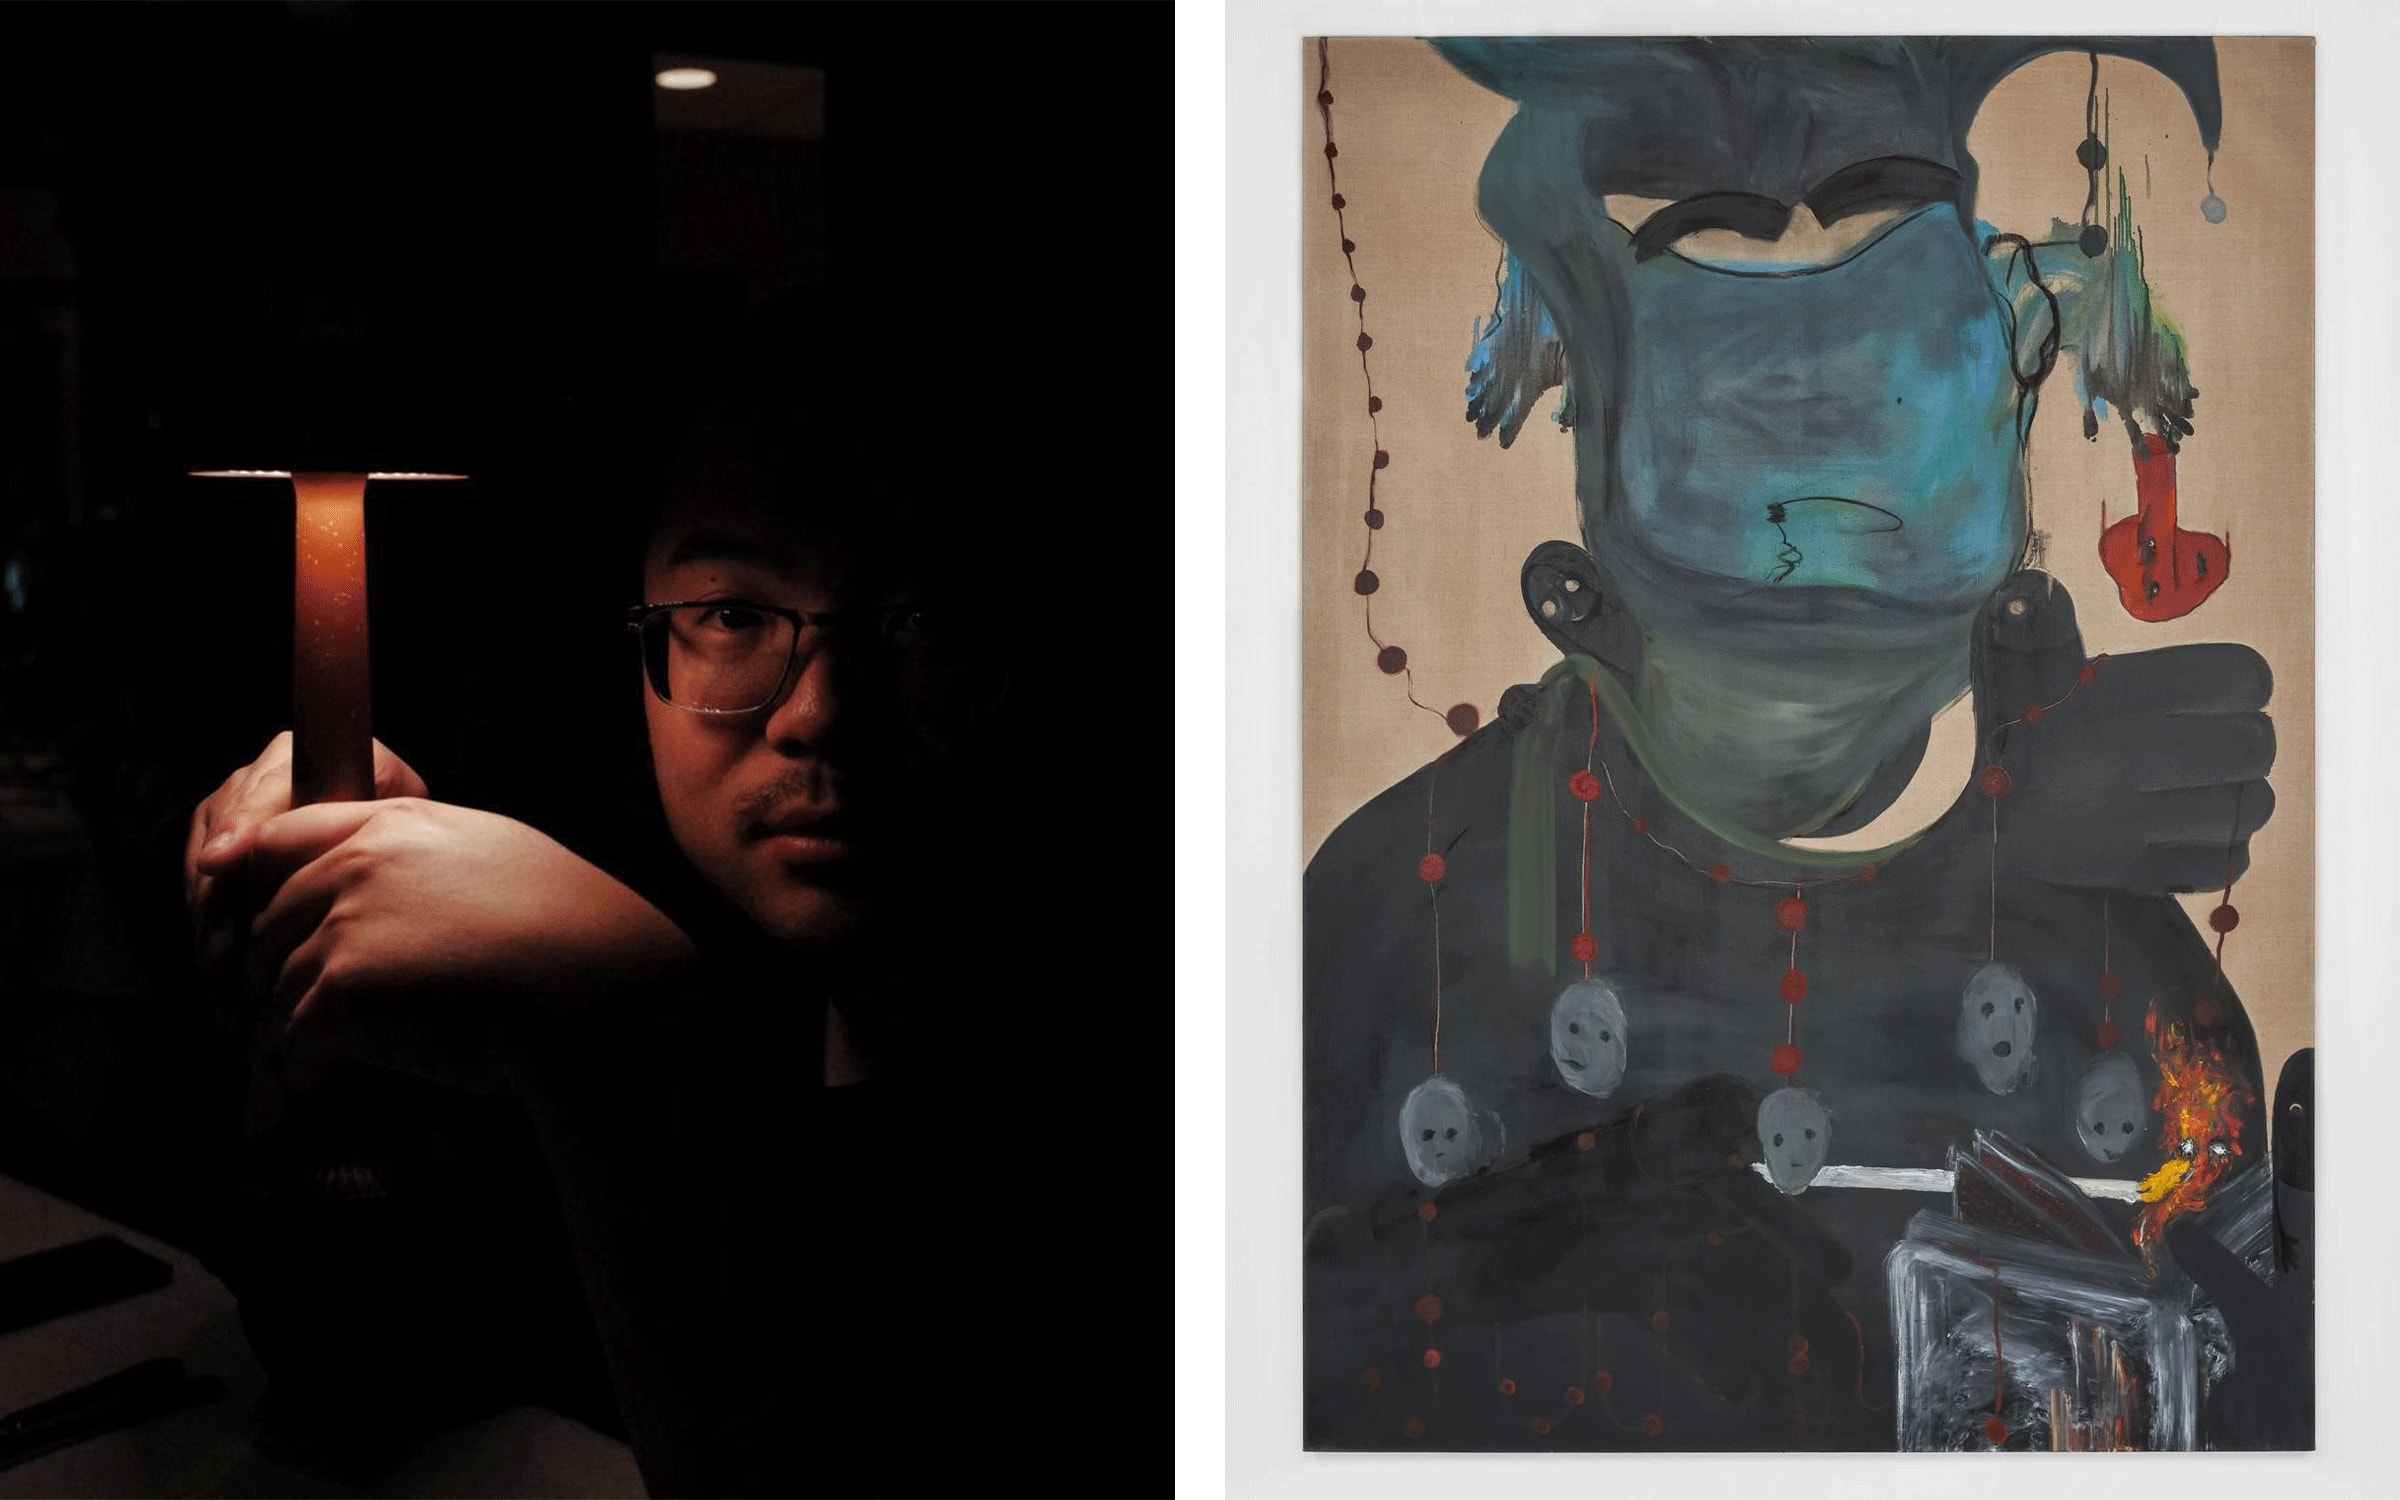 Left: Owen Fu. Photograph by Yusuke Ito. Right: Owen Fu, Chant, 2021. Courtesy of the artist, Balice Hertling (Paris), and Antenna Space (Shanghai).